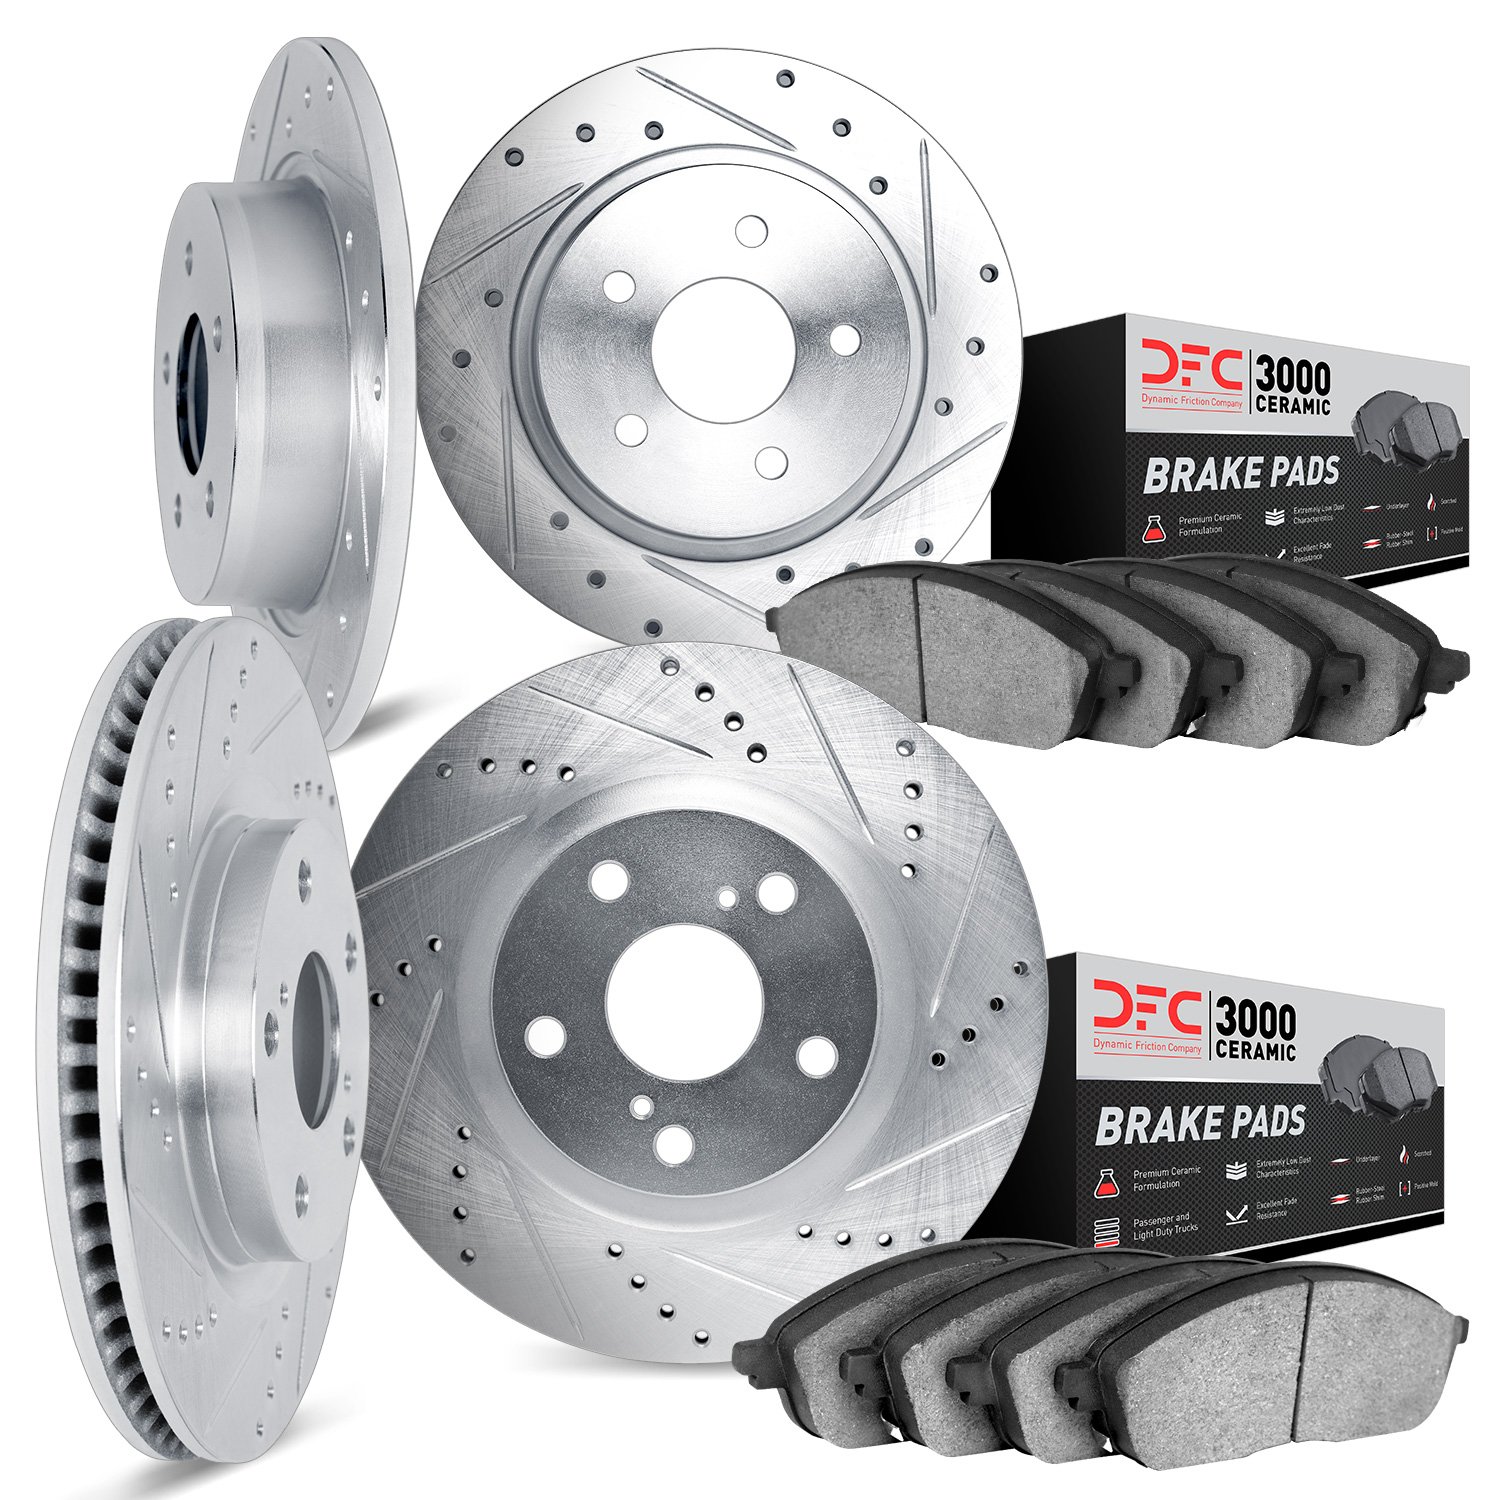 7304-54081 Drilled/Slotted Brake Rotor with 3000-Series Ceramic Brake Pads Kit [Silver], 2011-2012 Ford/Lincoln/Mercury/Mazda, P